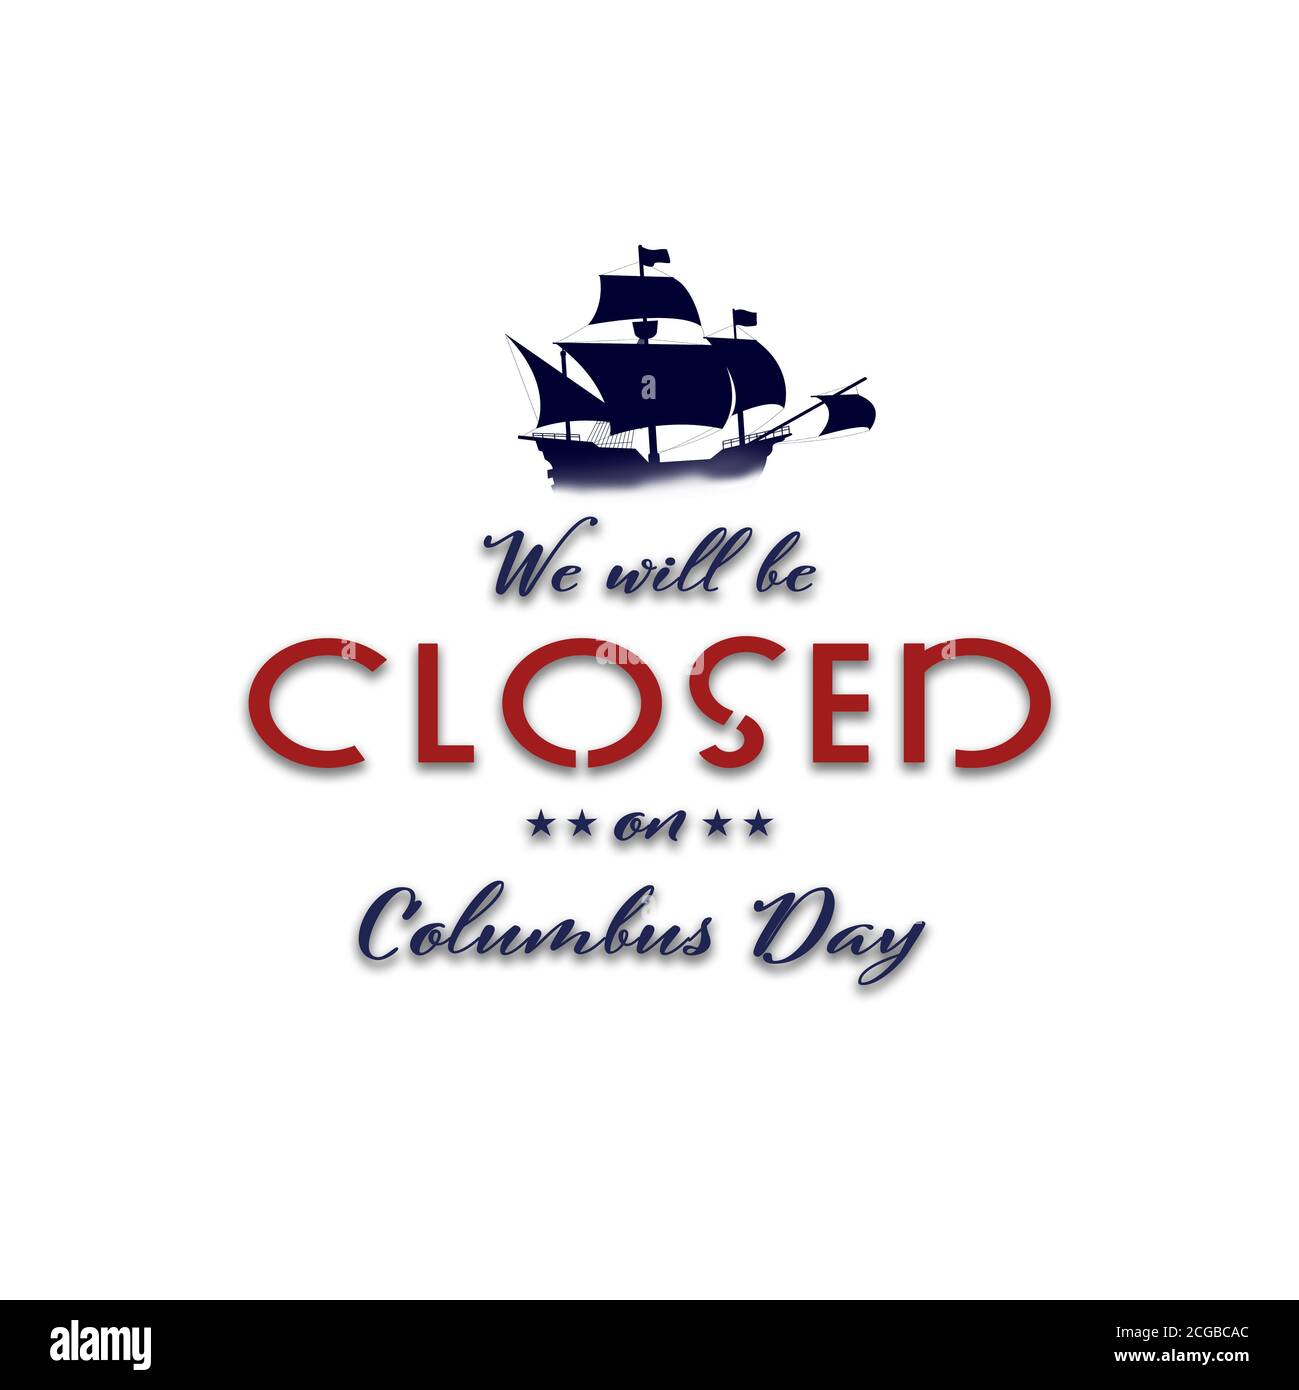 American National Holiday. US Flag background with Santa Maria. Text: We will be closed on Columbus Day. Stock Photo